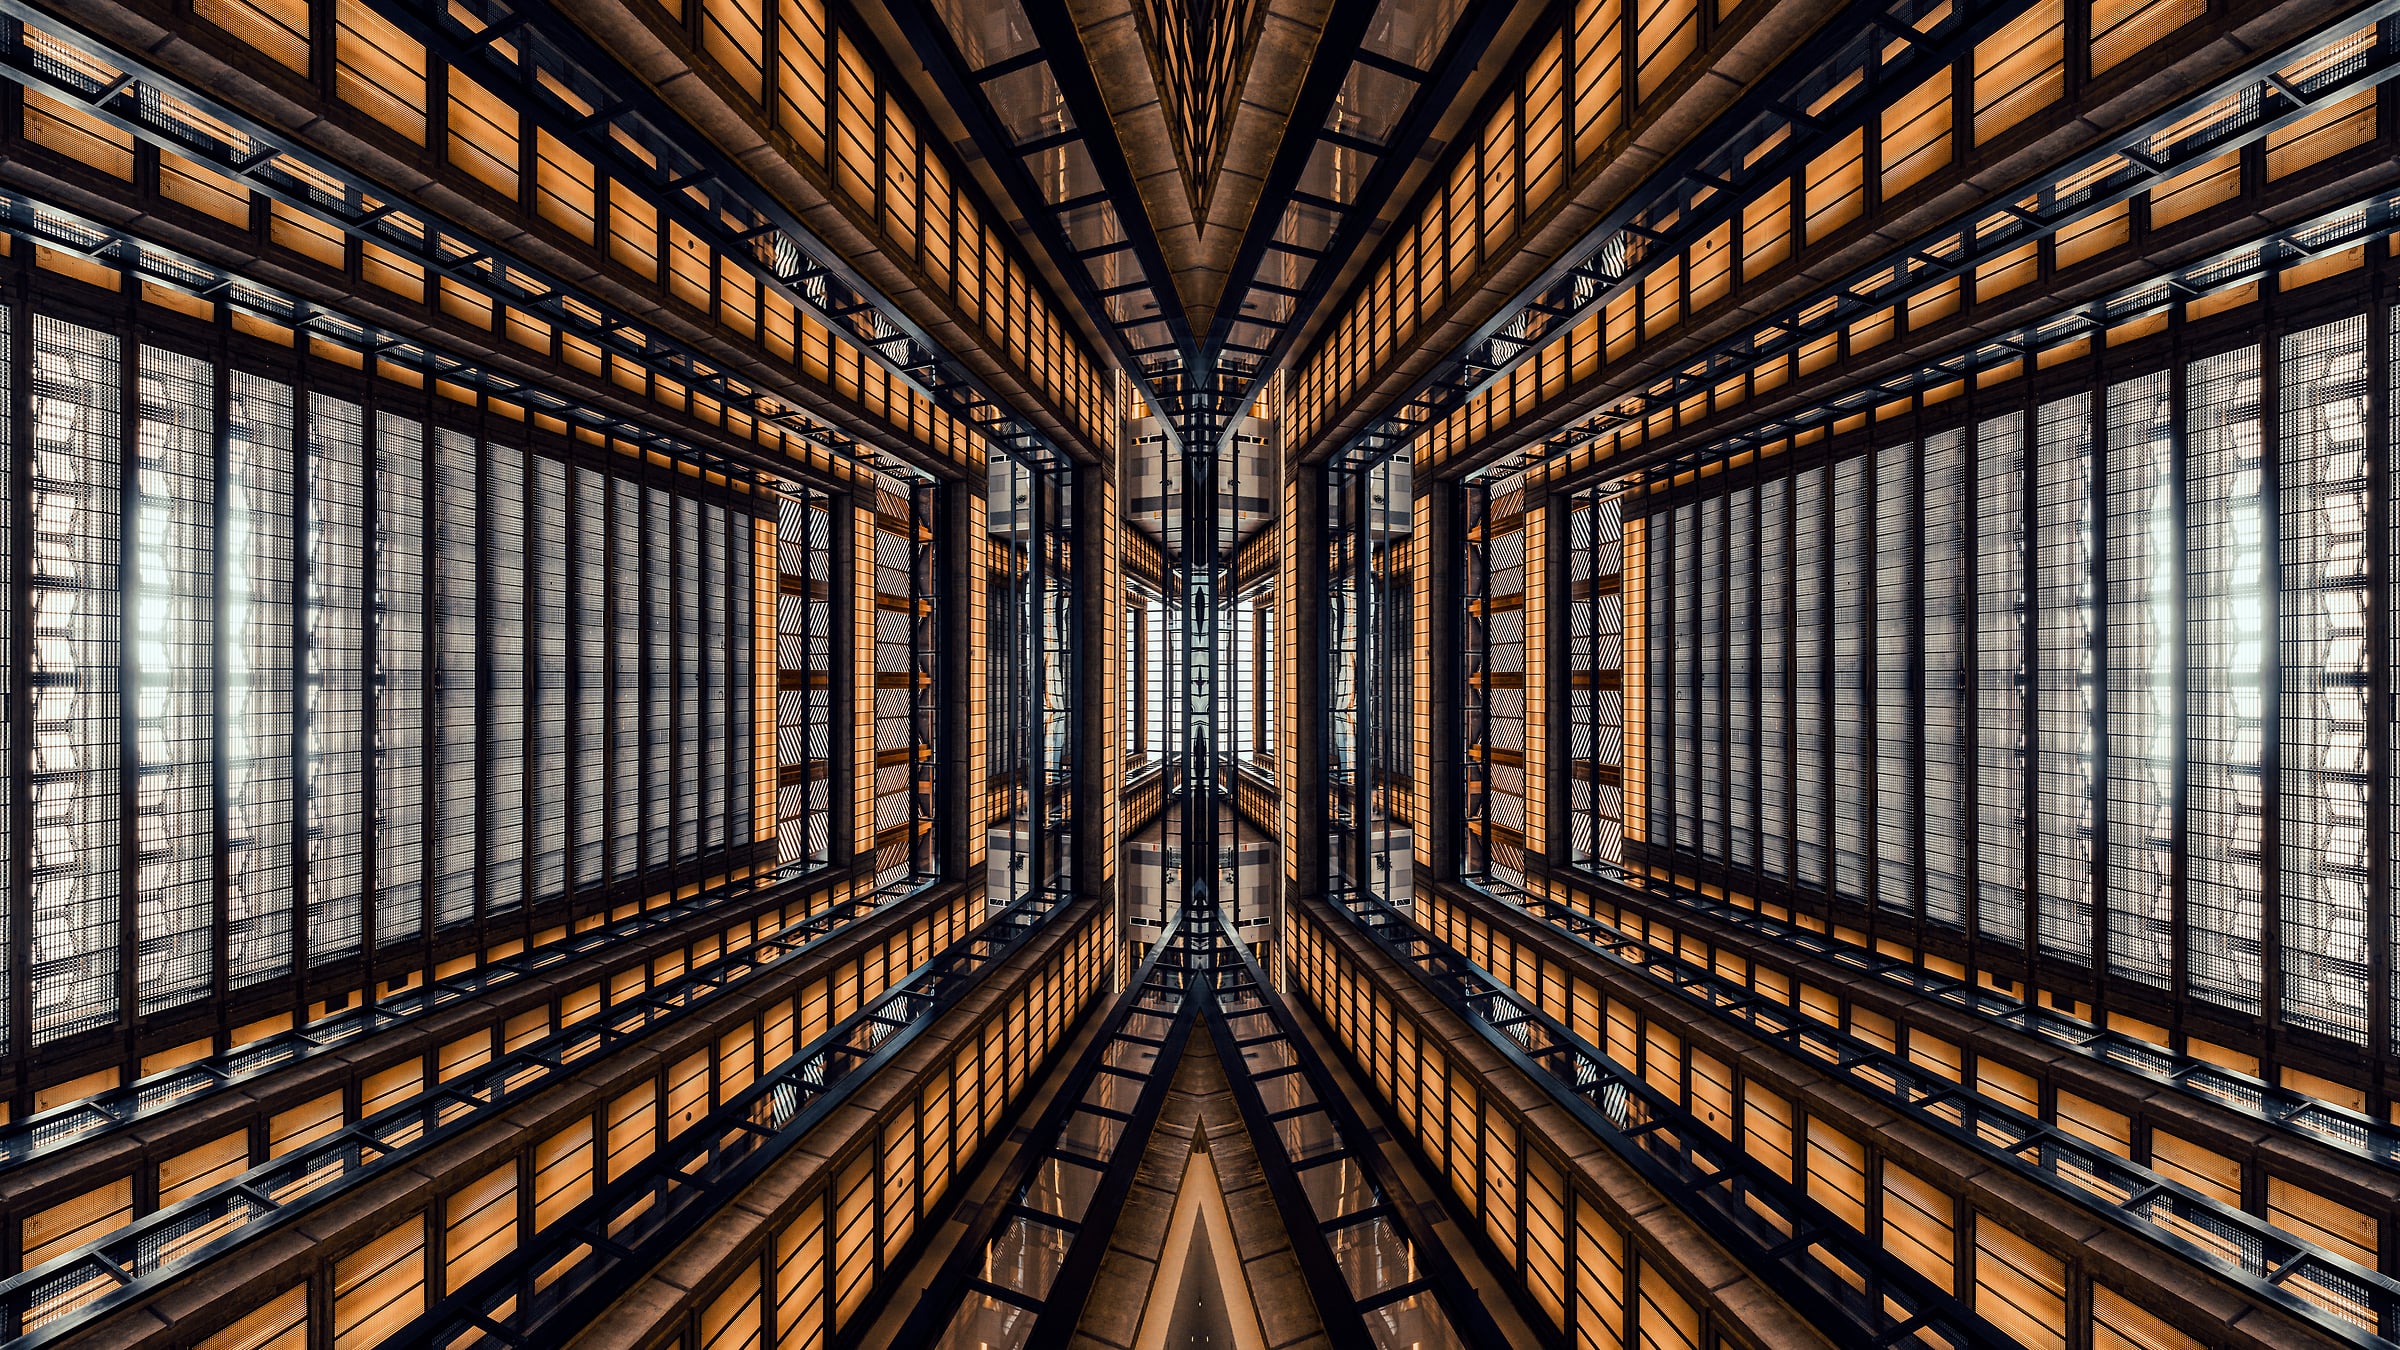 90 megapixels! A very high resolution, large-format VAST photo print of architecture; abstract photograph created by Beyti Barbaros in Bell Labs Holmdel Complex, Holmdel, NJ.